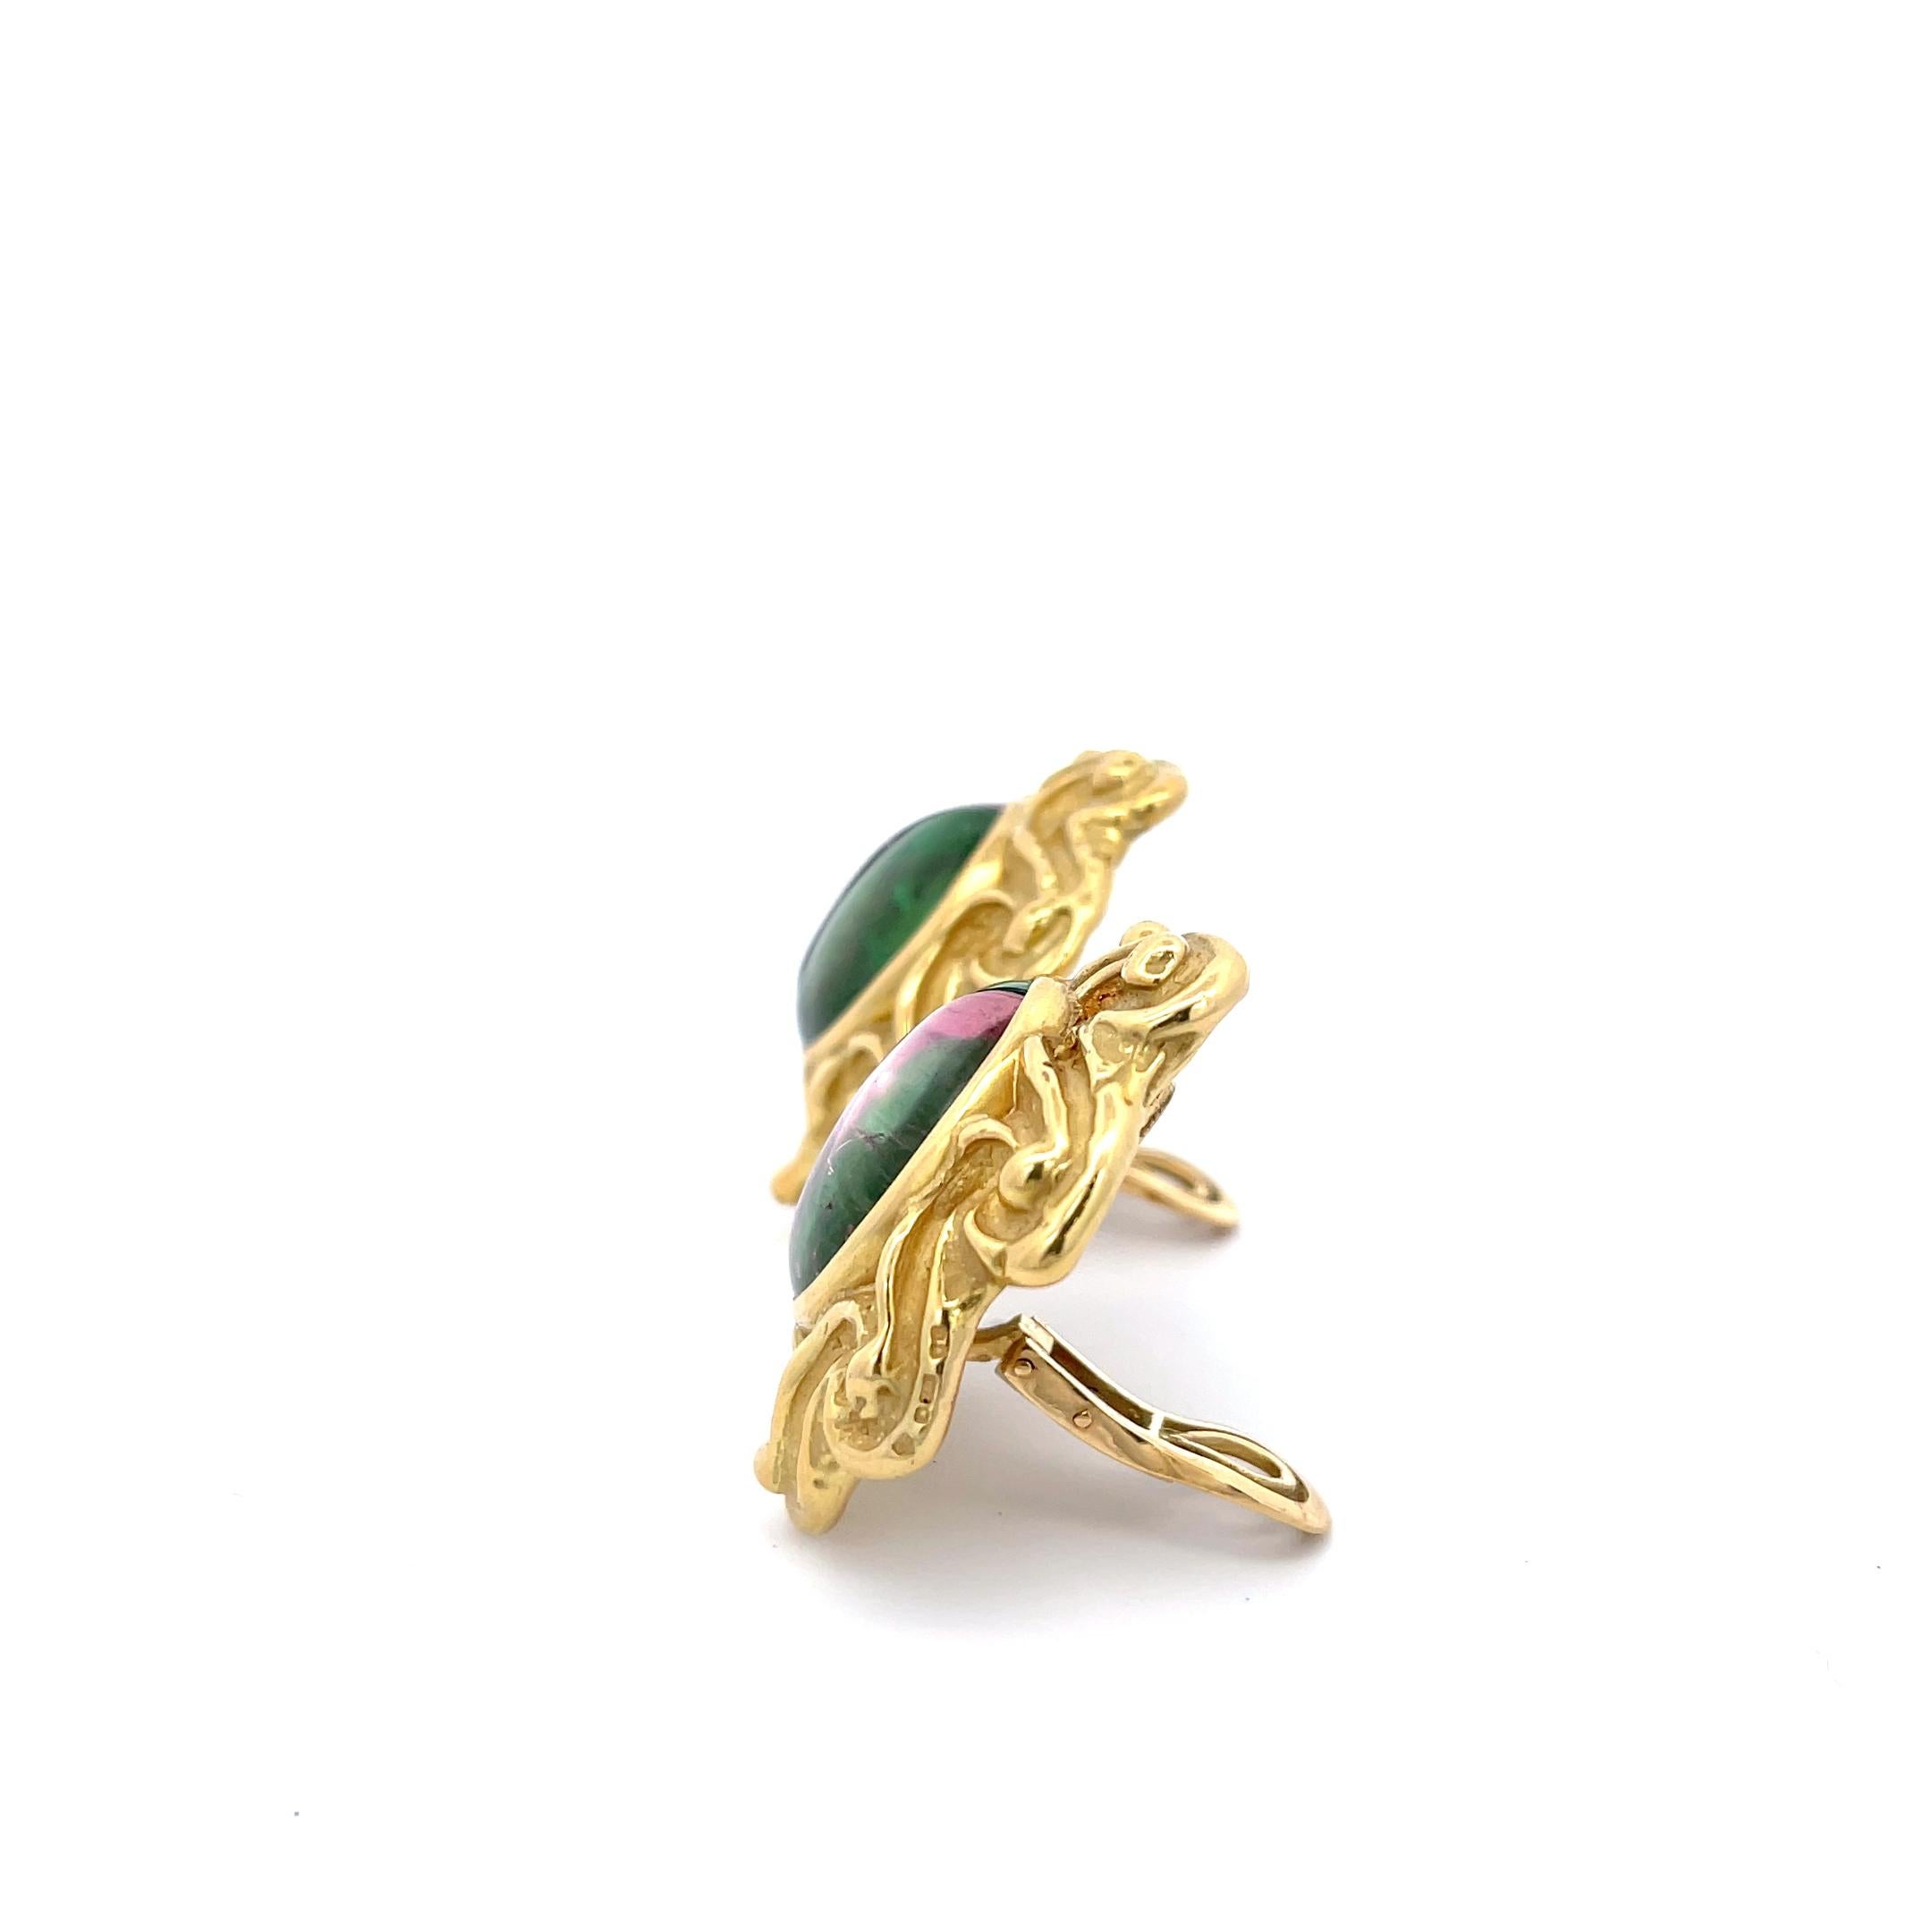 Estate Elizabeth Gage Pink and Green Tourmaline Clip-On Earrings in 18K Yellow Gold. The earrings measure approximately 1 3/8